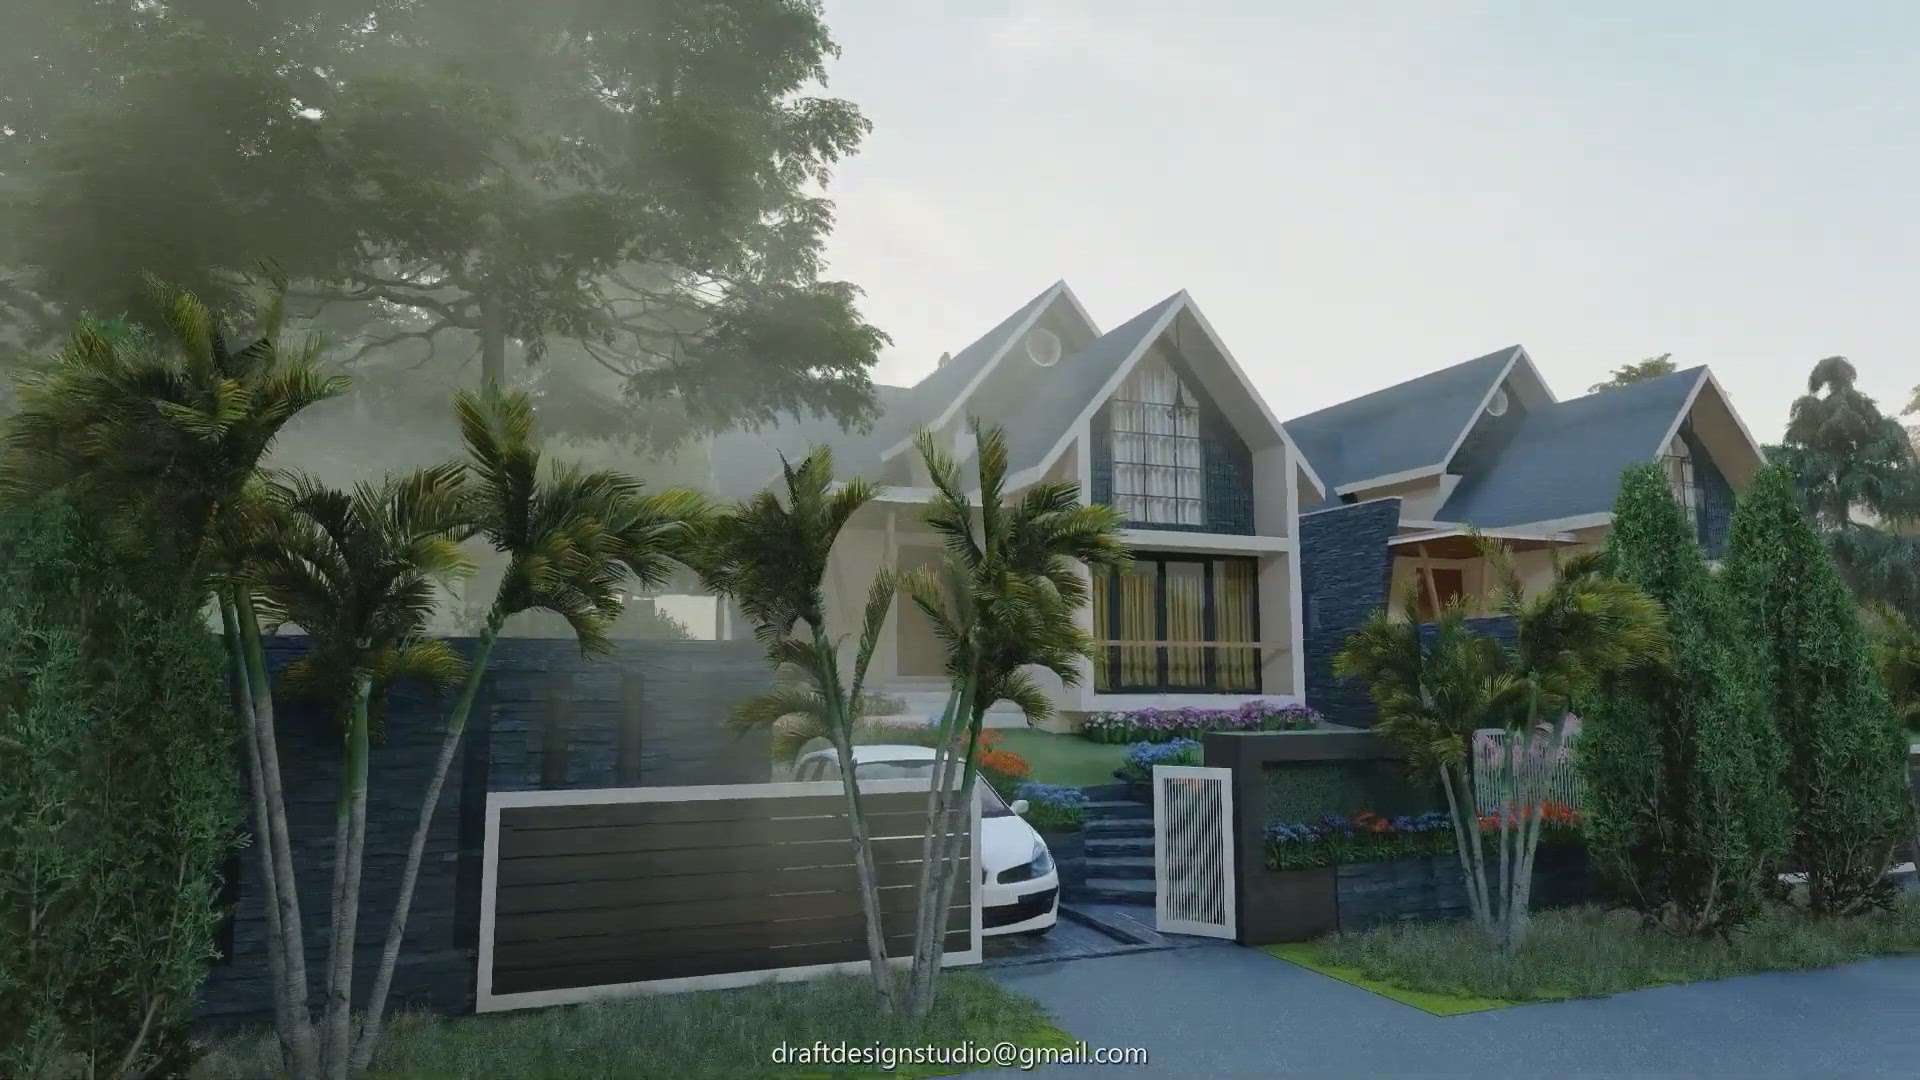 new resort design work 
“Being identifiably ‘something’ will help you stand out from the crowd. "
We Design Houses & Offices which notifies YOU !
~~~~
Draft Design Studio 
Services :
👉 3D Visualisation
👉 Interior & Exterior Drawing
For More Details :kerala,india
Phone : +91 8589944180
Email : draftdesignstudio63@gmail.com
#3d #interiordesigner #architecture #malappuram #interiordesign #homedesign #3dvisualisation #2D #2ddrawing #exteriordesign #builder #construction #InteriorDesigner